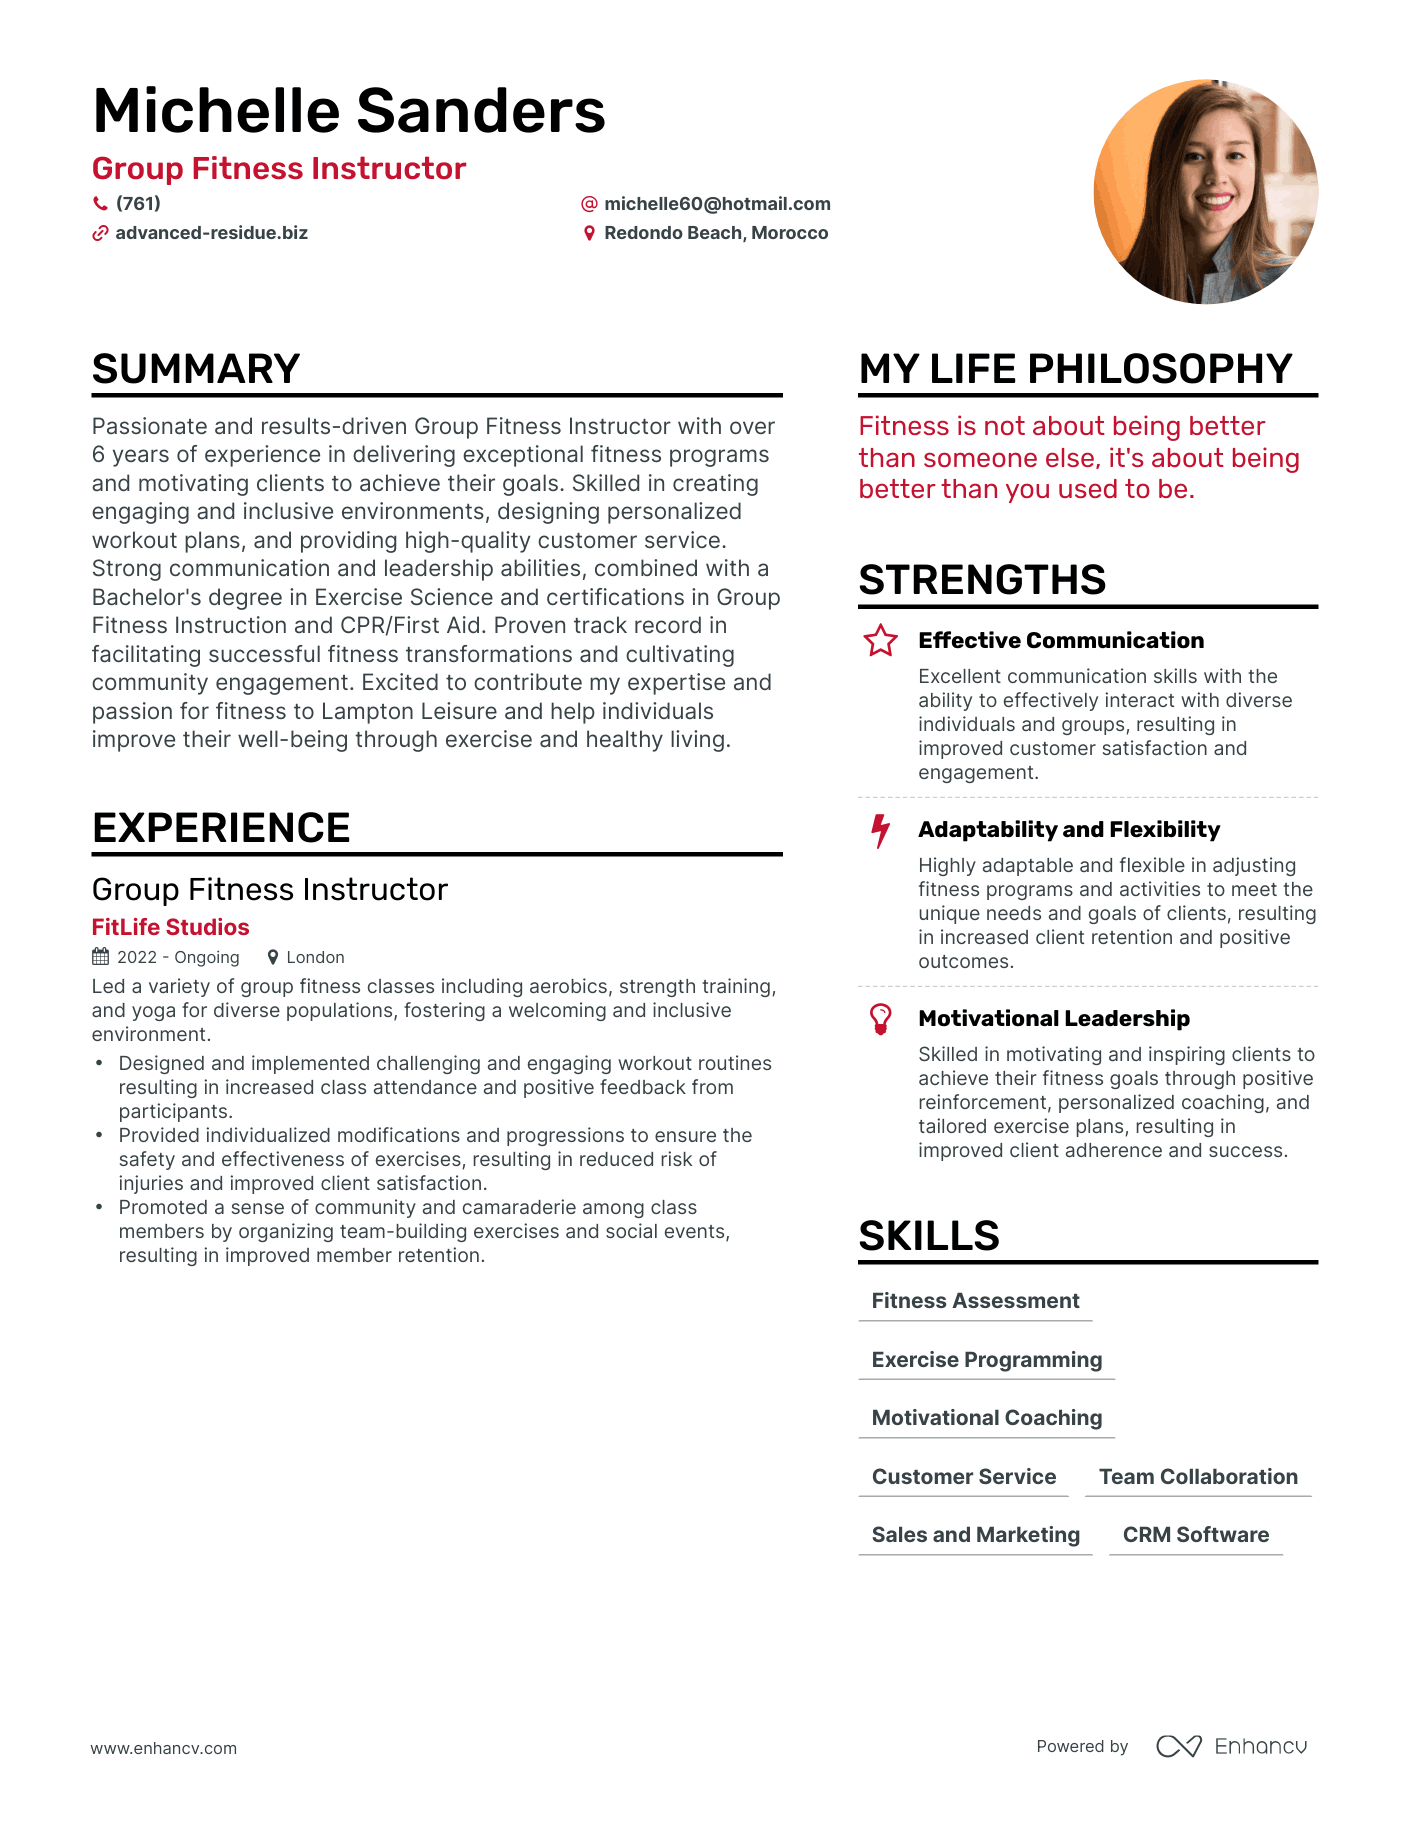 Group Fitness Instructor resume example